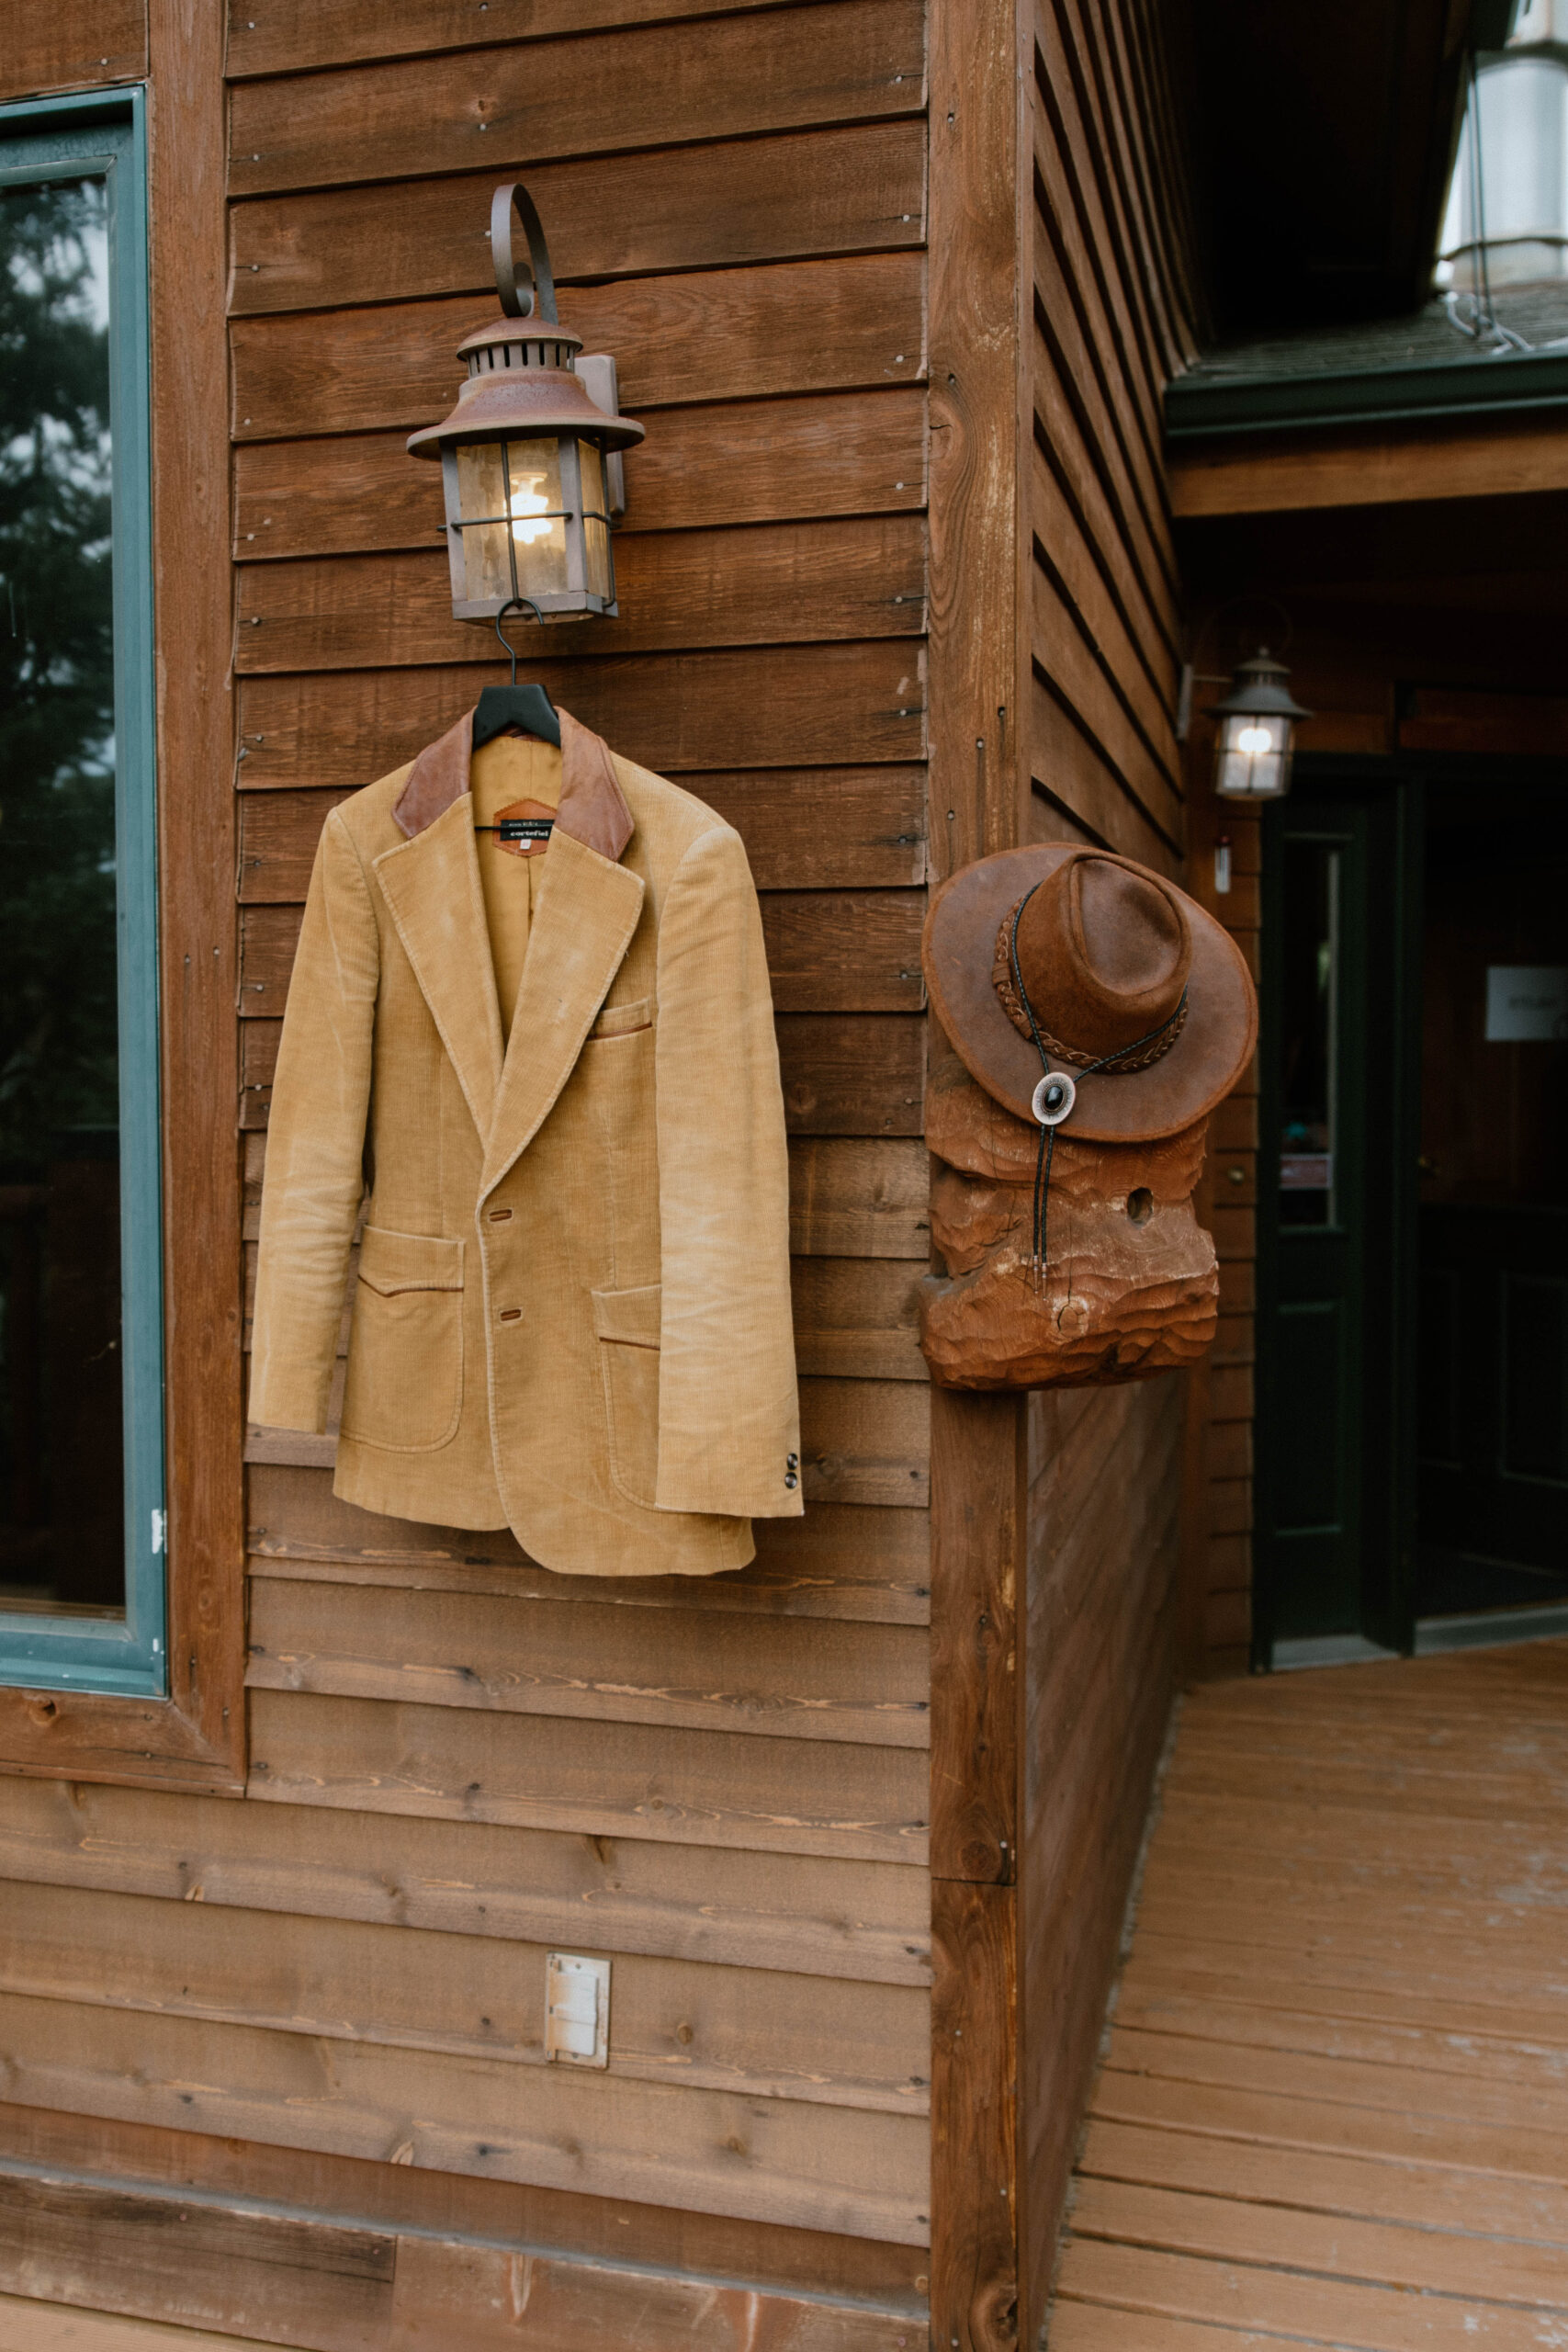 A wedding suit jacket hangs with a hat outside a cabin door